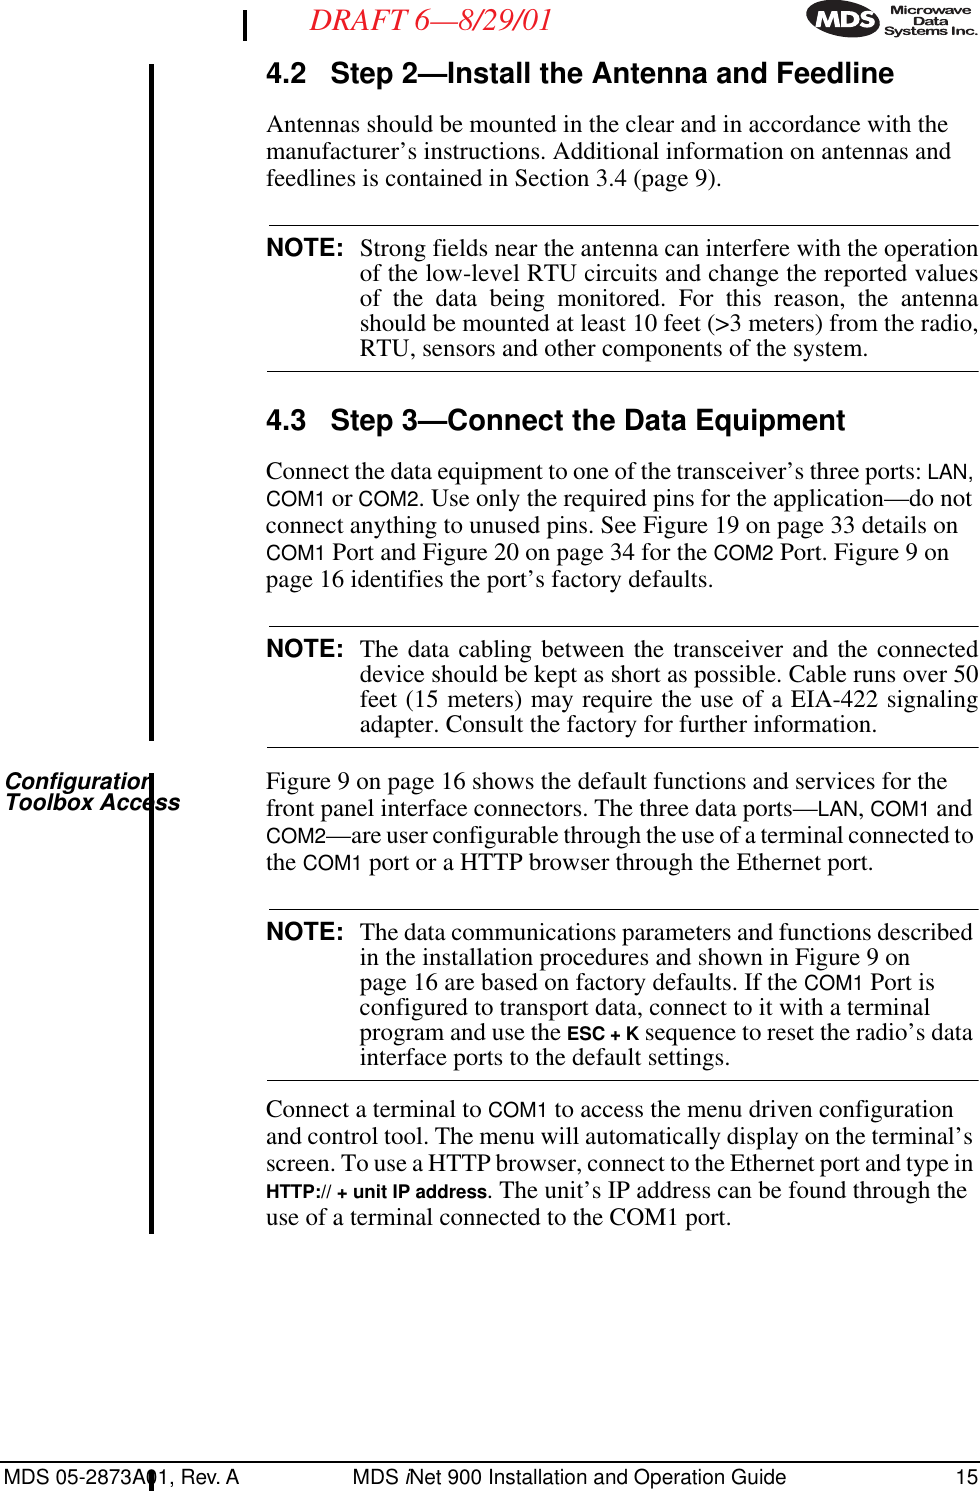 MDS 05-2873A01, Rev. A MDS iNet 900 Installation and Operation Guide 15DRAFT 6—8/29/014.2 Step 2—Install the Antenna and FeedlineAntennas should be mounted in the clear and in accordance with the manufacturer’s instructions. Additional information on antennas and feedlines is contained in Section 3.4 (page 9).NOTE: Strong fields near the antenna can interfere with the operationof the low-level RTU circuits and change the reported valuesof the data being monitored. For this reason, the antennashould be mounted at least 10 feet (&gt;3 meters) from the radio,RTU, sensors and other components of the system.4.3 Step 3—Connect the Data EquipmentConnect the data equipment to one of the transceiver’s three ports: LAN, COM1 or COM2. Use only the required pins for the application—do not connect anything to unused pins. See Figure 19 on page 33 details on COM1 Port and Figure 20 on page 34 for the COM2 Port. Figure 9 on page 16 identifies the port’s factory defaults.NOTE: The data cabling between the transceiver and the connecteddevice should be kept as short as possible. Cable runs over 50feet (15 meters) may require the use of a EIA-422 signalingadapter. Consult the factory for further information.Configuration Toolbox Access Figure 9 on page 16 shows the default functions and services for the front panel interface connectors. The three data ports—LAN, COM1 and COM2—are user configurable through the use of a terminal connected to the COM1 port or a HTTP browser through the Ethernet port. NOTE: The data communications parameters and functions described in the installation procedures and shown in Figure 9 on page 16 are based on factory defaults. If the COM1 Port is configured to transport data, connect to it with a terminal program and use the ESC + K sequence to reset the radio’s data interface ports to the default settings.Connect a terminal to COM1 to access the menu driven configuration and control tool. The menu will automatically display on the terminal’s screen. To use a HTTP browser, connect to the Ethernet port and type in HTTP:// + unit IP address. The unit’s IP address can be found through the use of a terminal connected to the COM1 port.